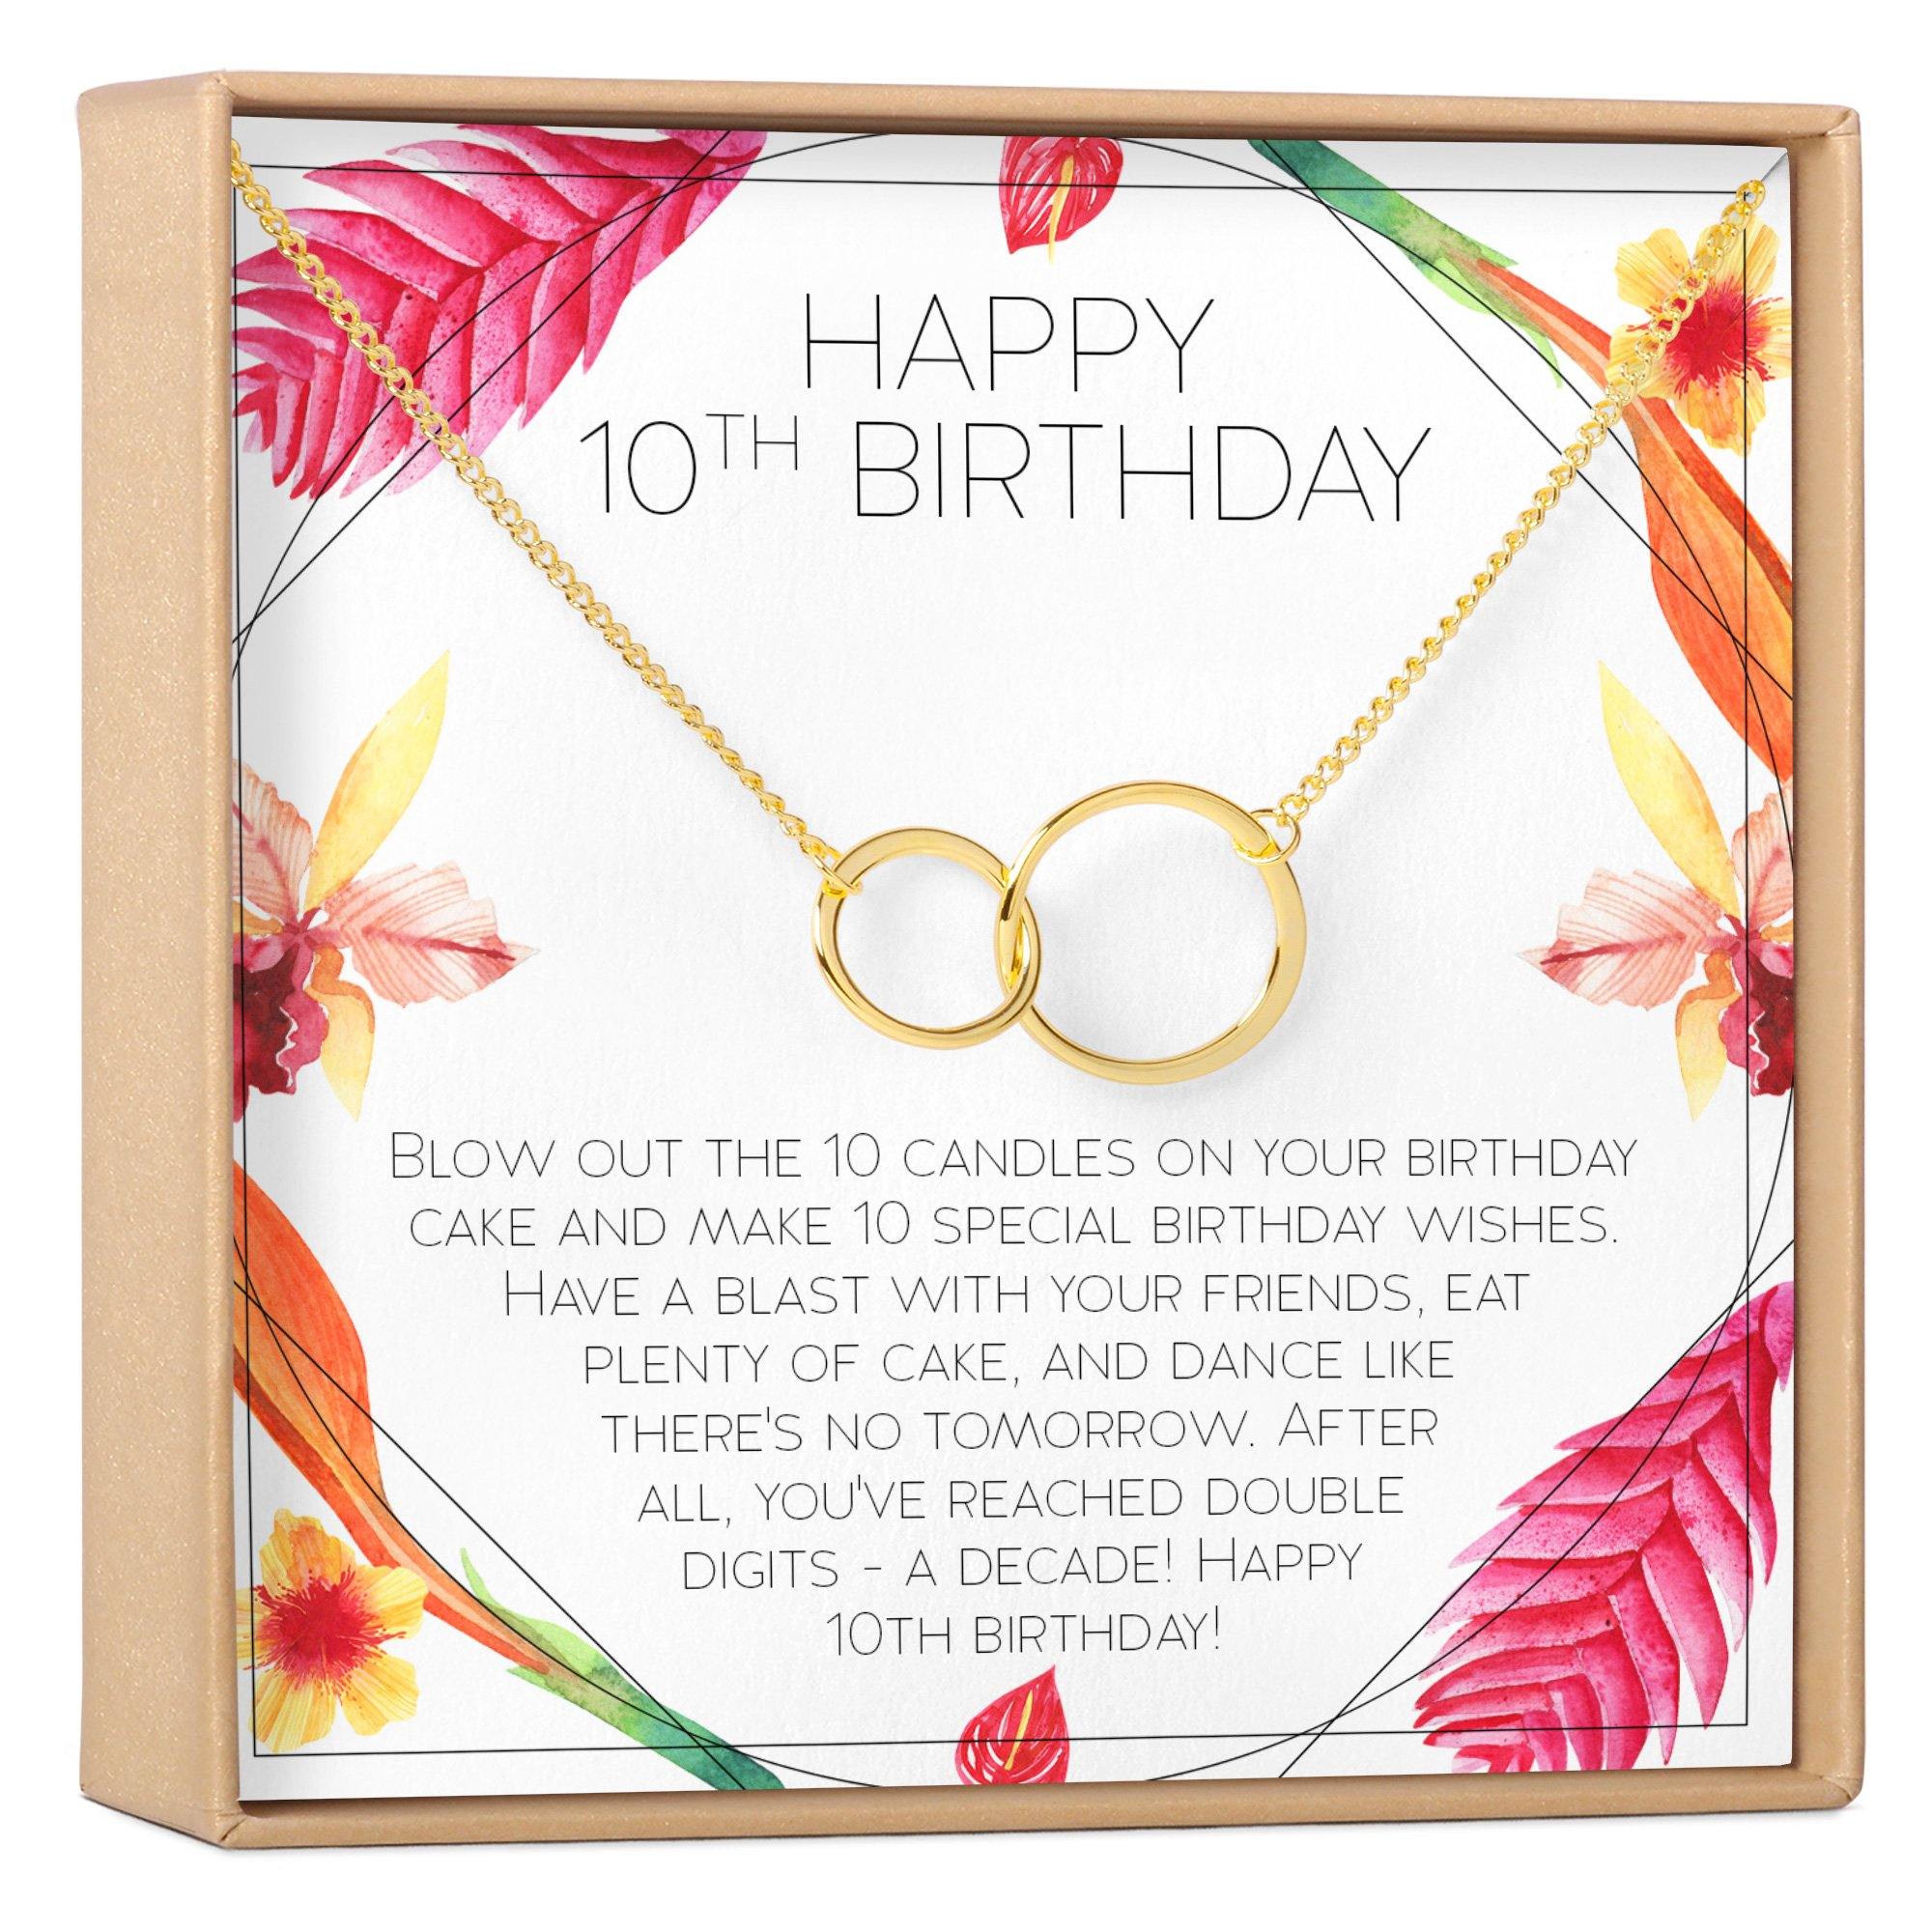 10th Birthday Gift for Girls: Birthday Present for Ten Year Old Girl, Necklace, Jewelry, Bday Gift, Gift Idea, Daughter, Niece, 2 Asymmetrical Circles